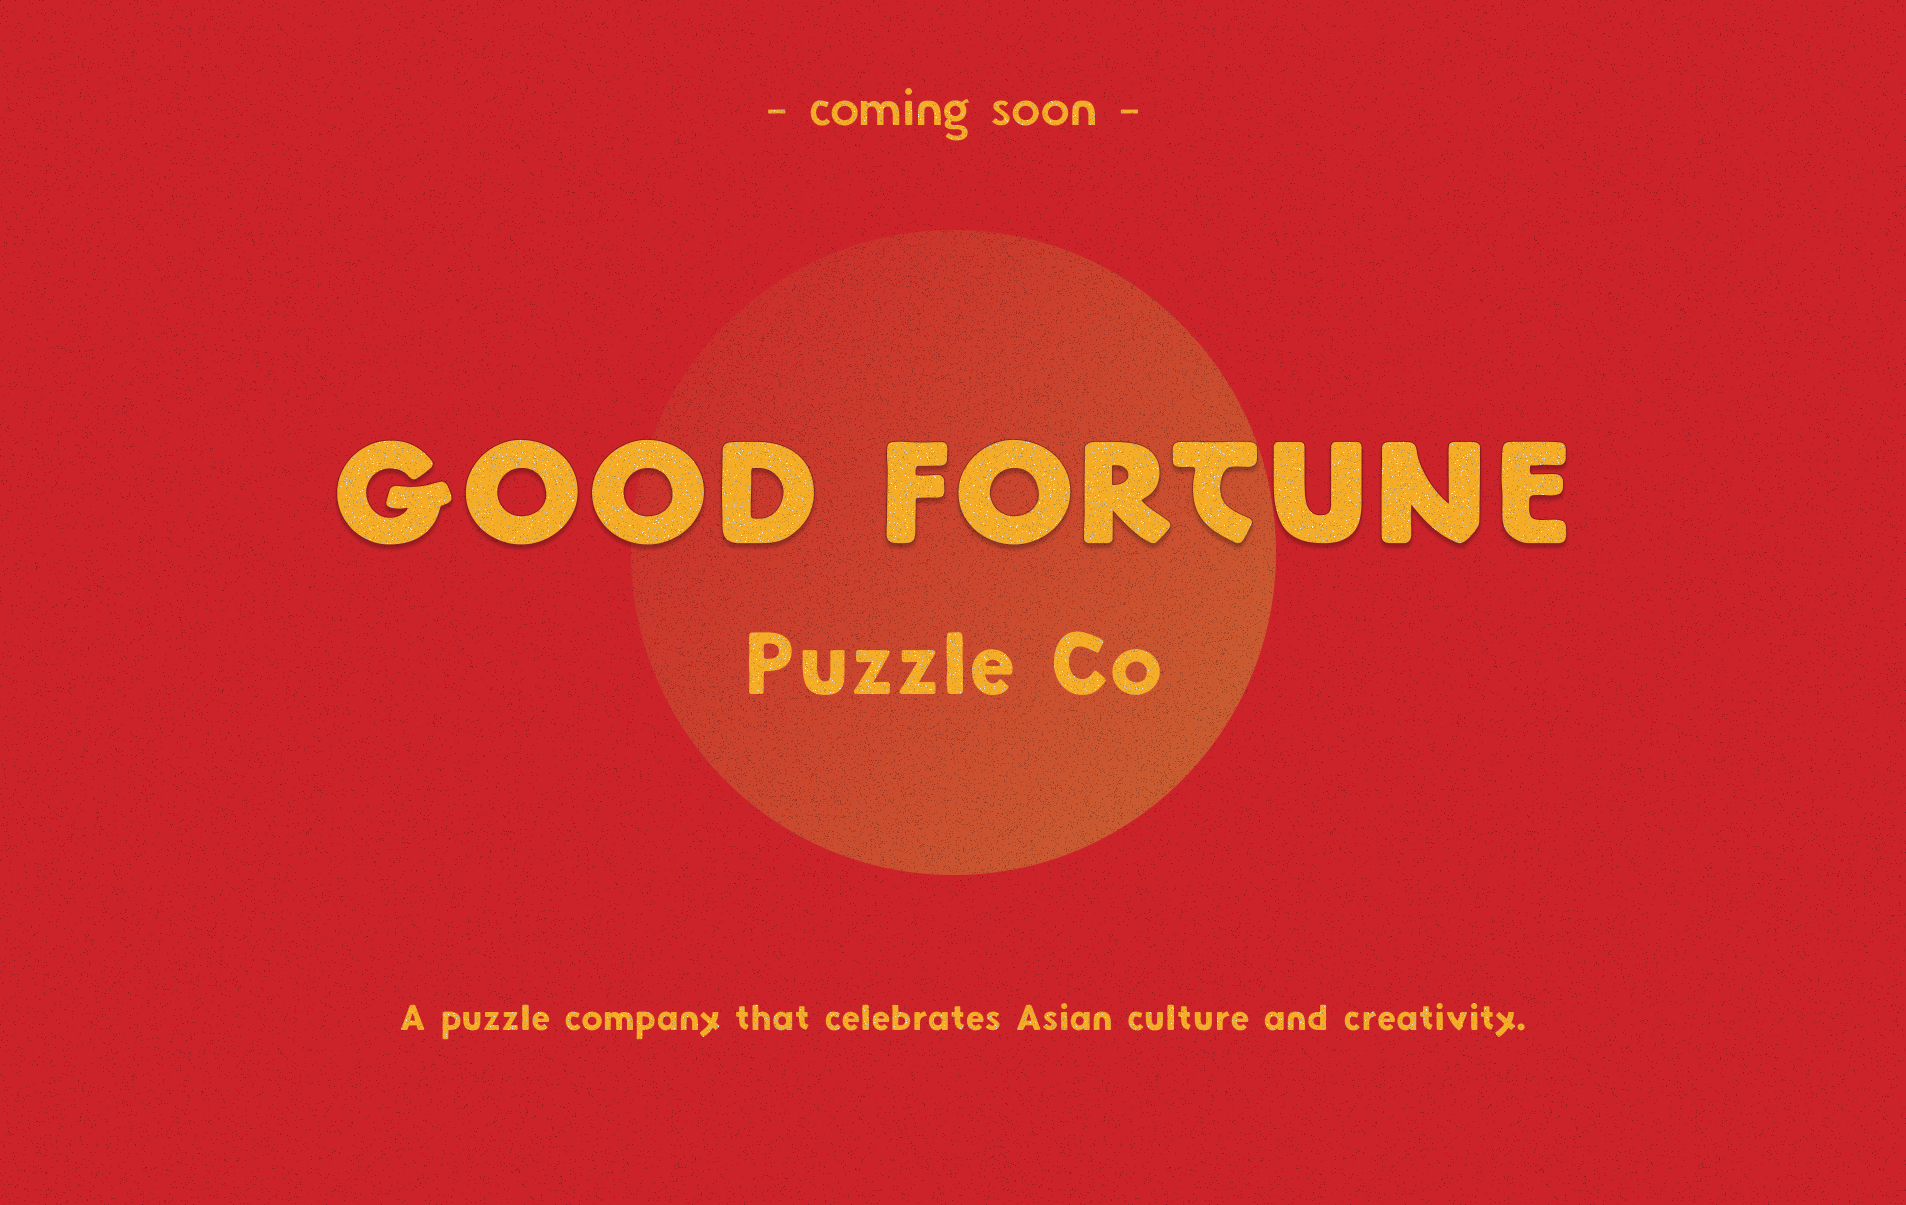 Good Fortune Puzzle Co |  A puzzle company that celebrates Asian culture and creativity.